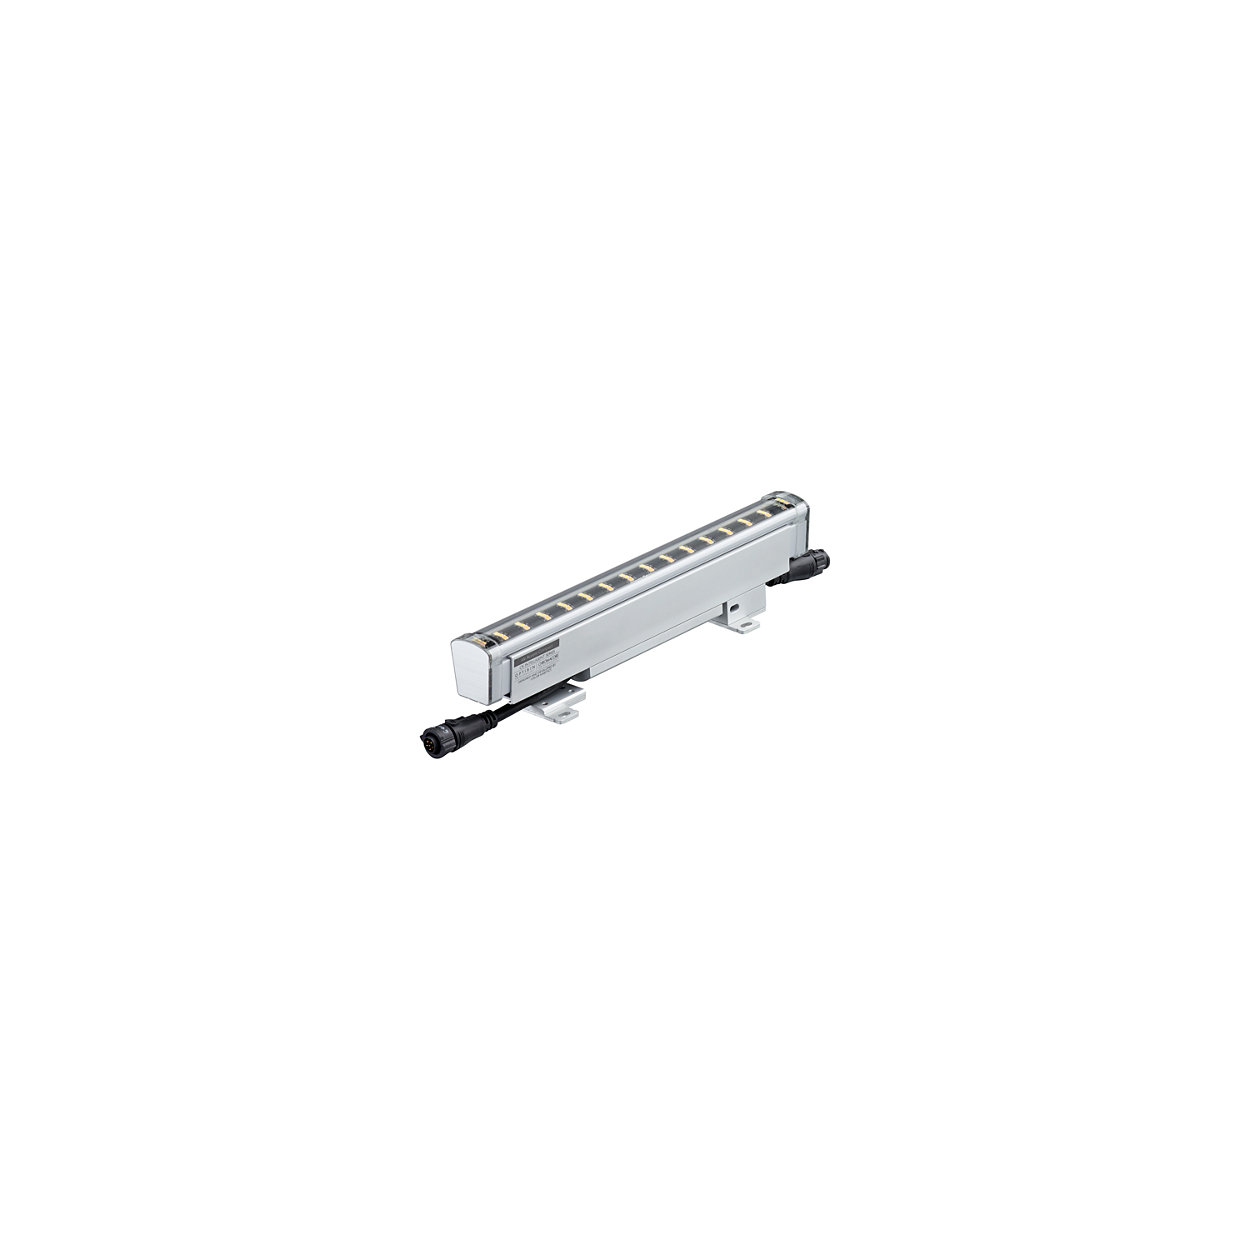 iW Accent Compact - High resolution media direct view linear LED luminaire with intelligent white light